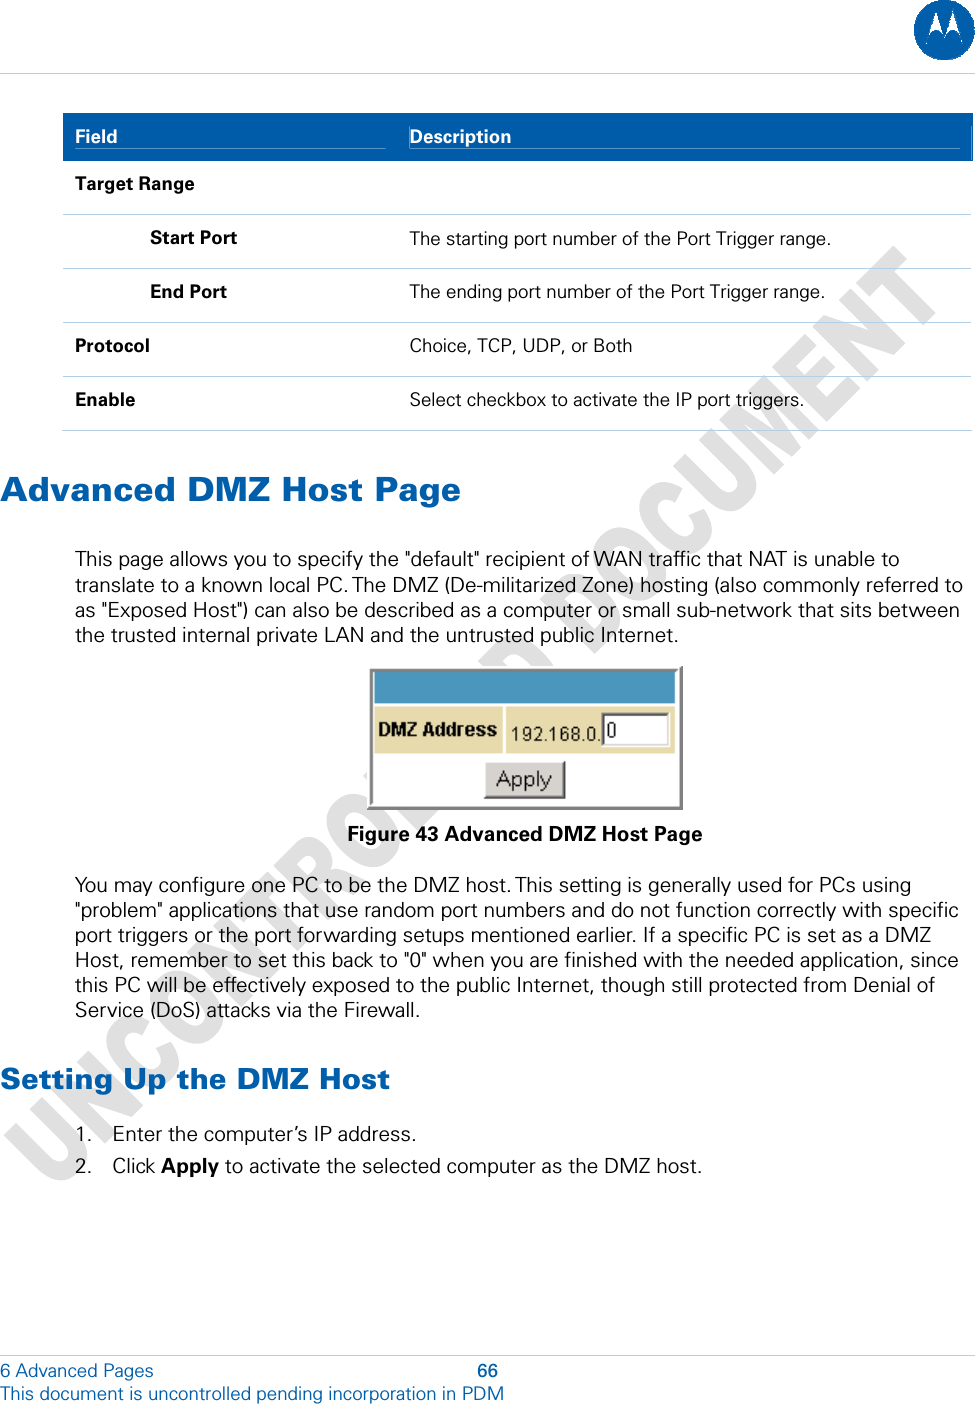  6 Advanced Pages  66 This document is uncontrolled pending incorporation in PDM  Field  Description Target Range    Start Port  The starting port number of the Port Trigger range.  End Port  The ending port number of the Port Trigger range. Protocol  Choice, TCP, UDP, or Both Enable  Select checkbox to activate the IP port triggers. Advanced DMZ Host Page This page allows you to specify the &quot;default&quot; recipient of WAN traffic that NAT is unable to translate to a known local PC. The DMZ (De-militarized Zone) hosting (also commonly referred to as &quot;Exposed Host&quot;) can also be described as a computer or small sub-network that sits between the trusted internal private LAN and the untrusted public Internet.  Figure 43 Advanced DMZ Host Page You may configure one PC to be the DMZ host. This setting is generally used for PCs using &quot;problem&quot; applications that use random port numbers and do not function correctly with specific port triggers or the port forwarding setups mentioned earlier. If a specific PC is set as a DMZ Host, remember to set this back to &quot;0&quot; when you are finished with the needed application, since this PC will be effectively exposed to the public Internet, though still protected from Denial of Service (DoS) attacks via the Firewall. Setting Up the DMZ Host 1. Enter the computer’s IP address. 2. Click Apply to activate the selected computer as the DMZ host.  